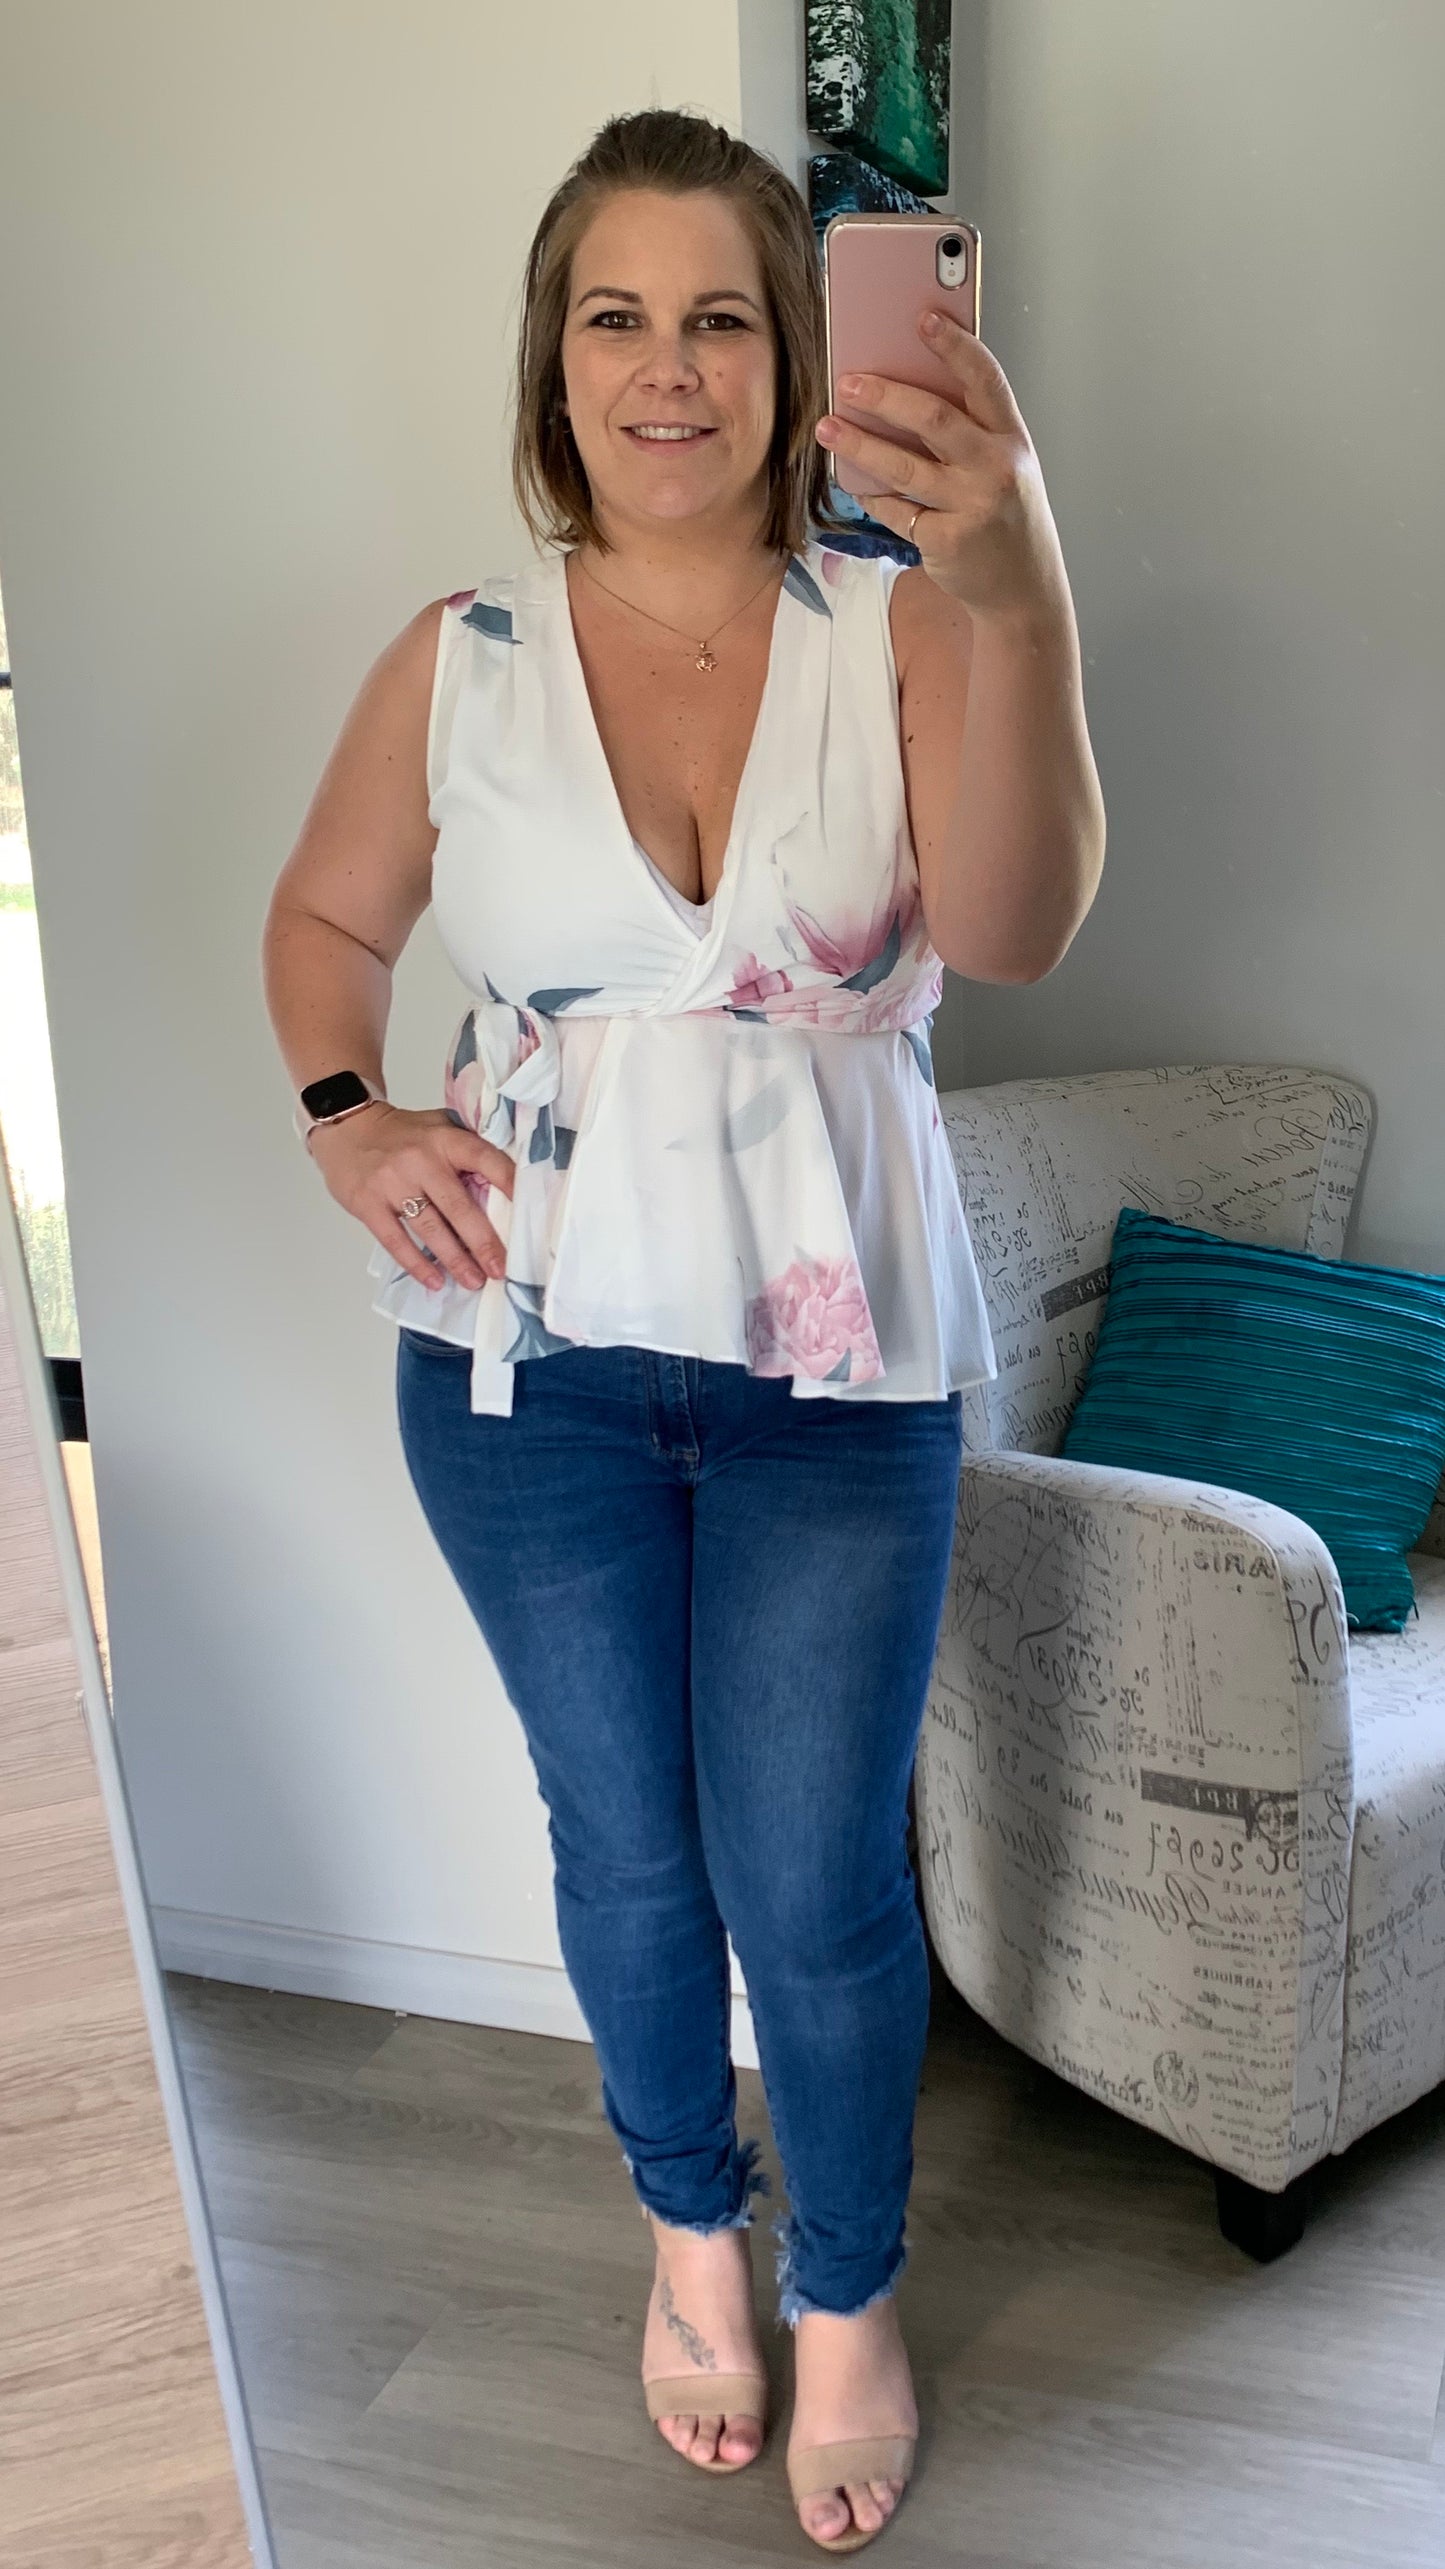 Wrap Floral Print Top with Pleating Details - White - 
Polyester
Wrap V-neckline feature
Centre back invisible zip
Floral print design
Self fabric tie on front
Our model is 170cm tall and is wearing a size 6
Size up if  - Ajoy - Ciao Bella DressesTopsTops